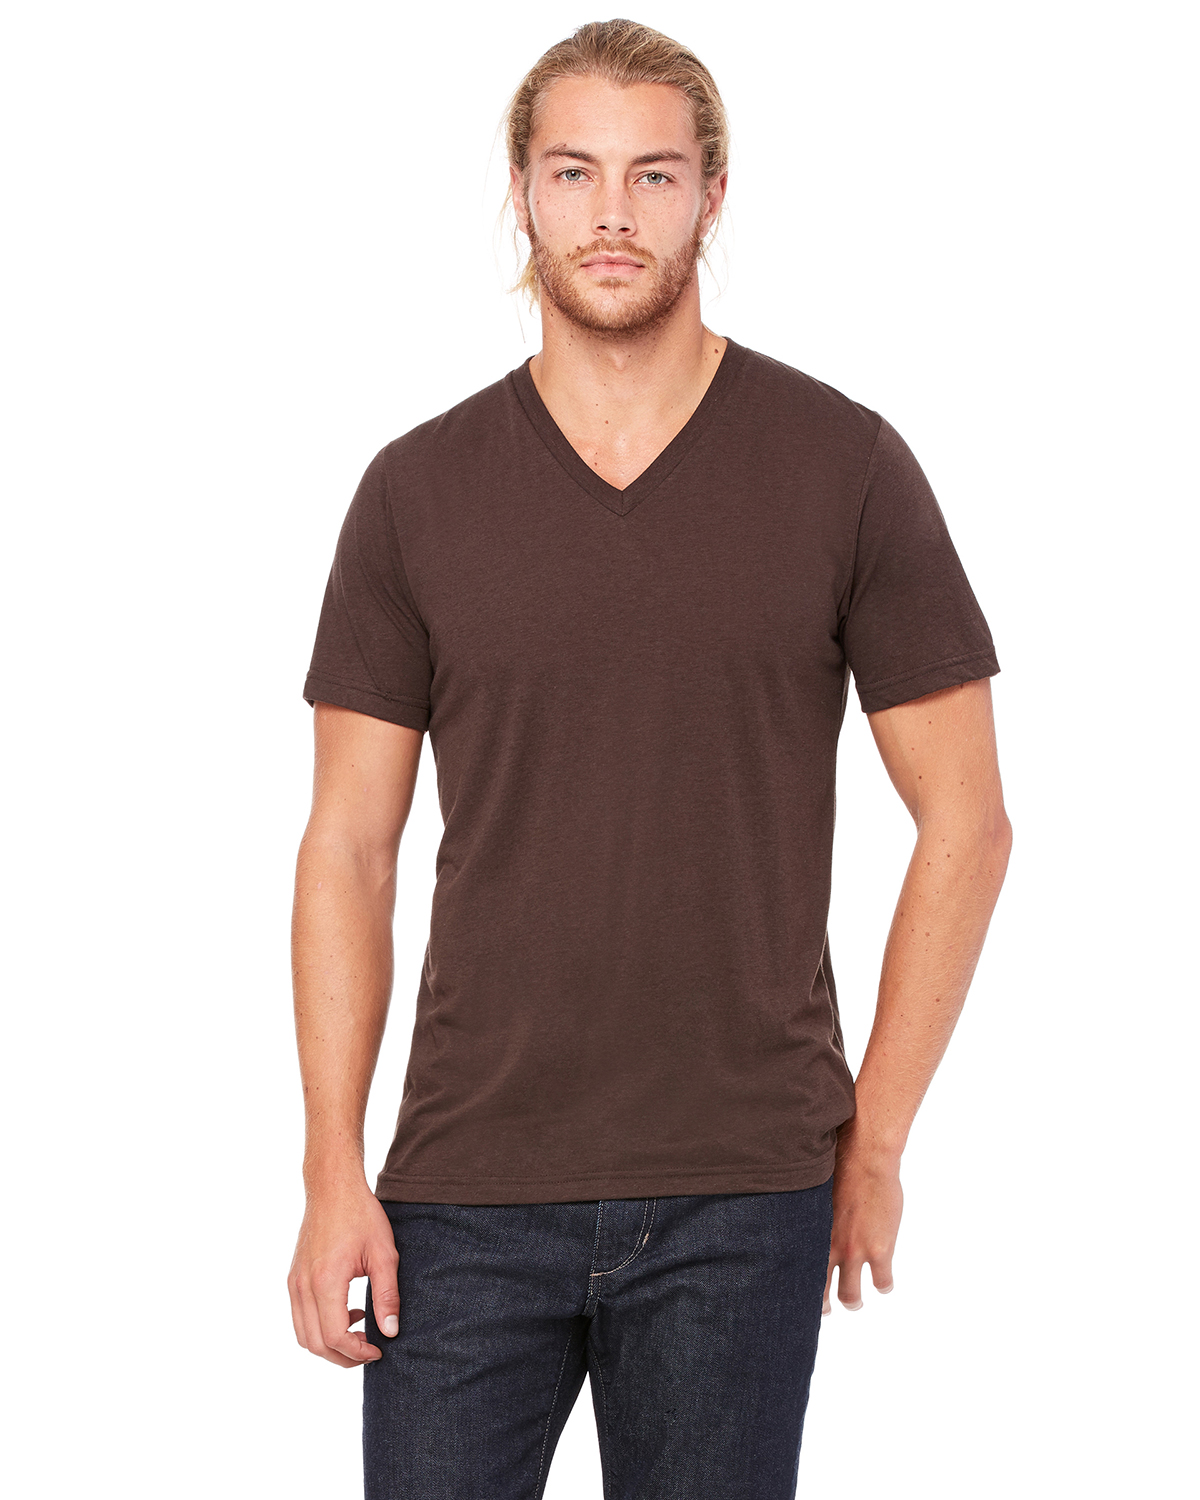 Top 5 Cheap Wholesale Blank T Shirt Suppliers in Atlanta 